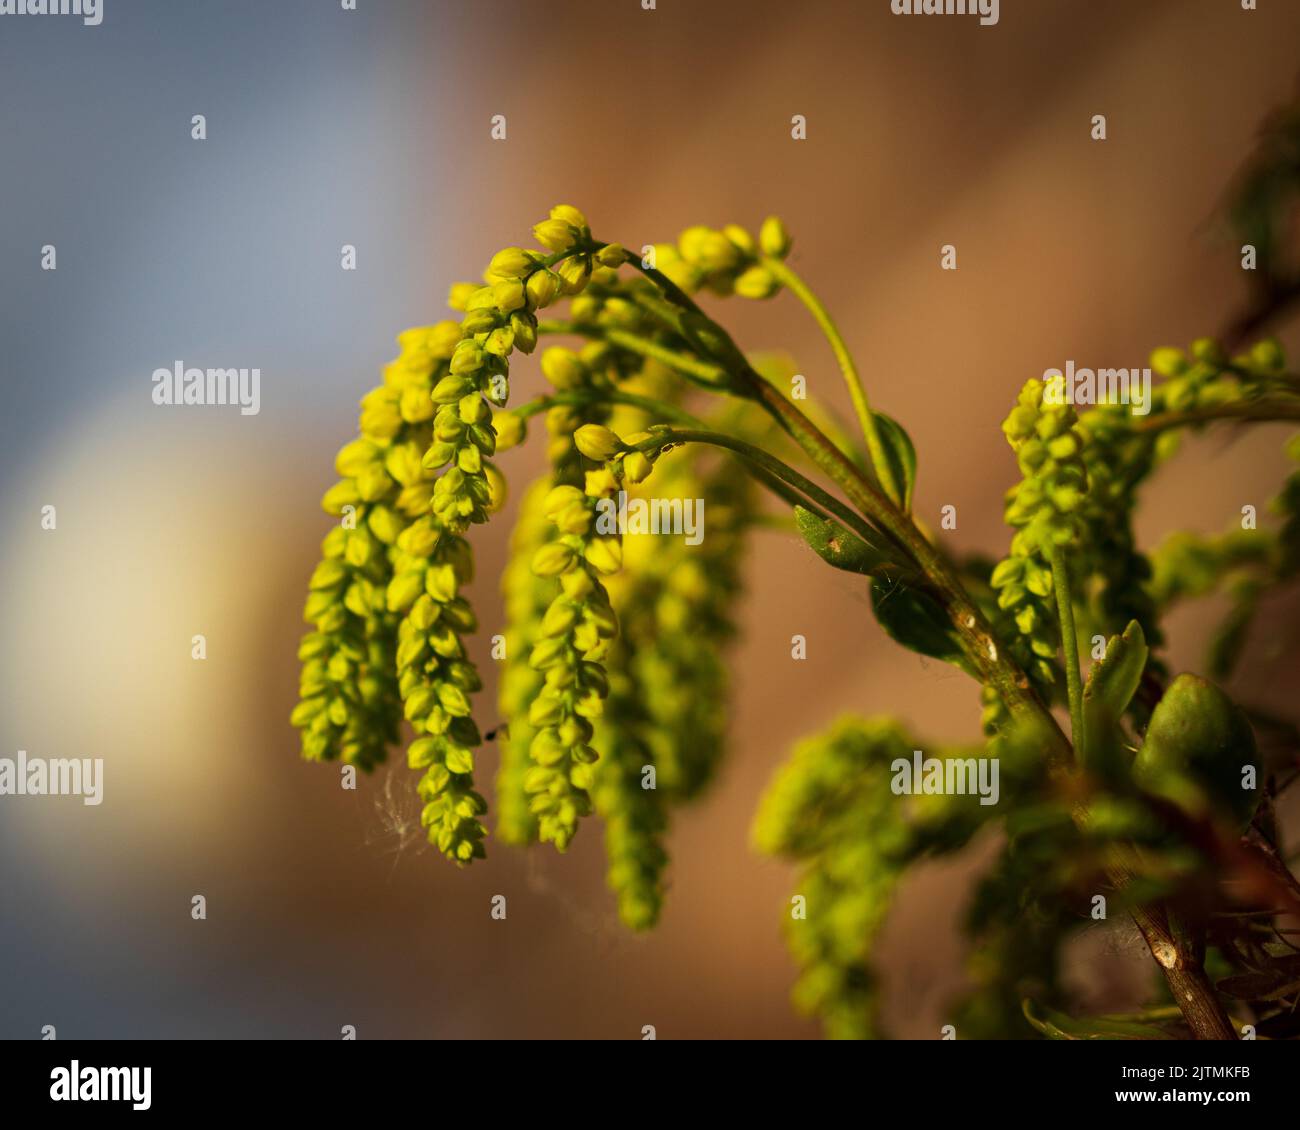 Closeup of Chiastophyllum oppositifolium with yellow trailing flowers growing in garden on blurred background Stock Photo